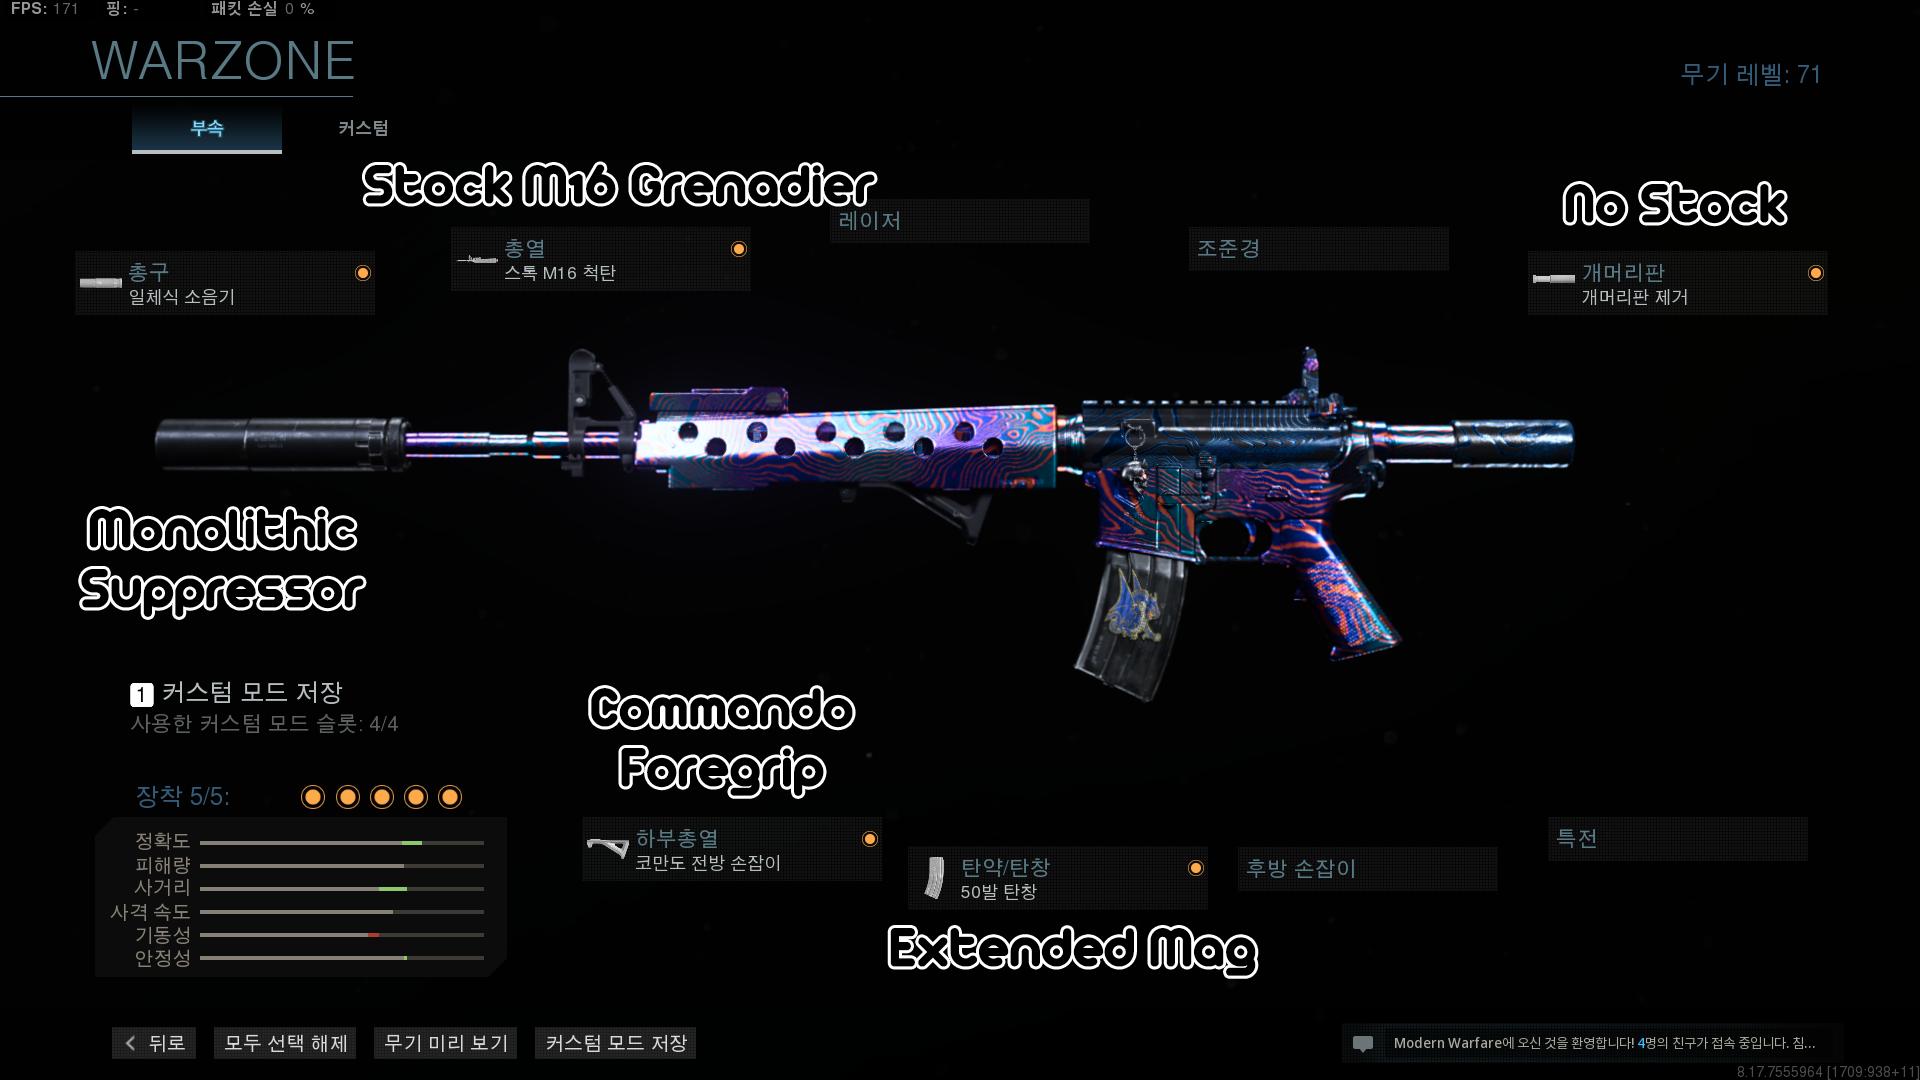 M4A1 customized for Warzone.